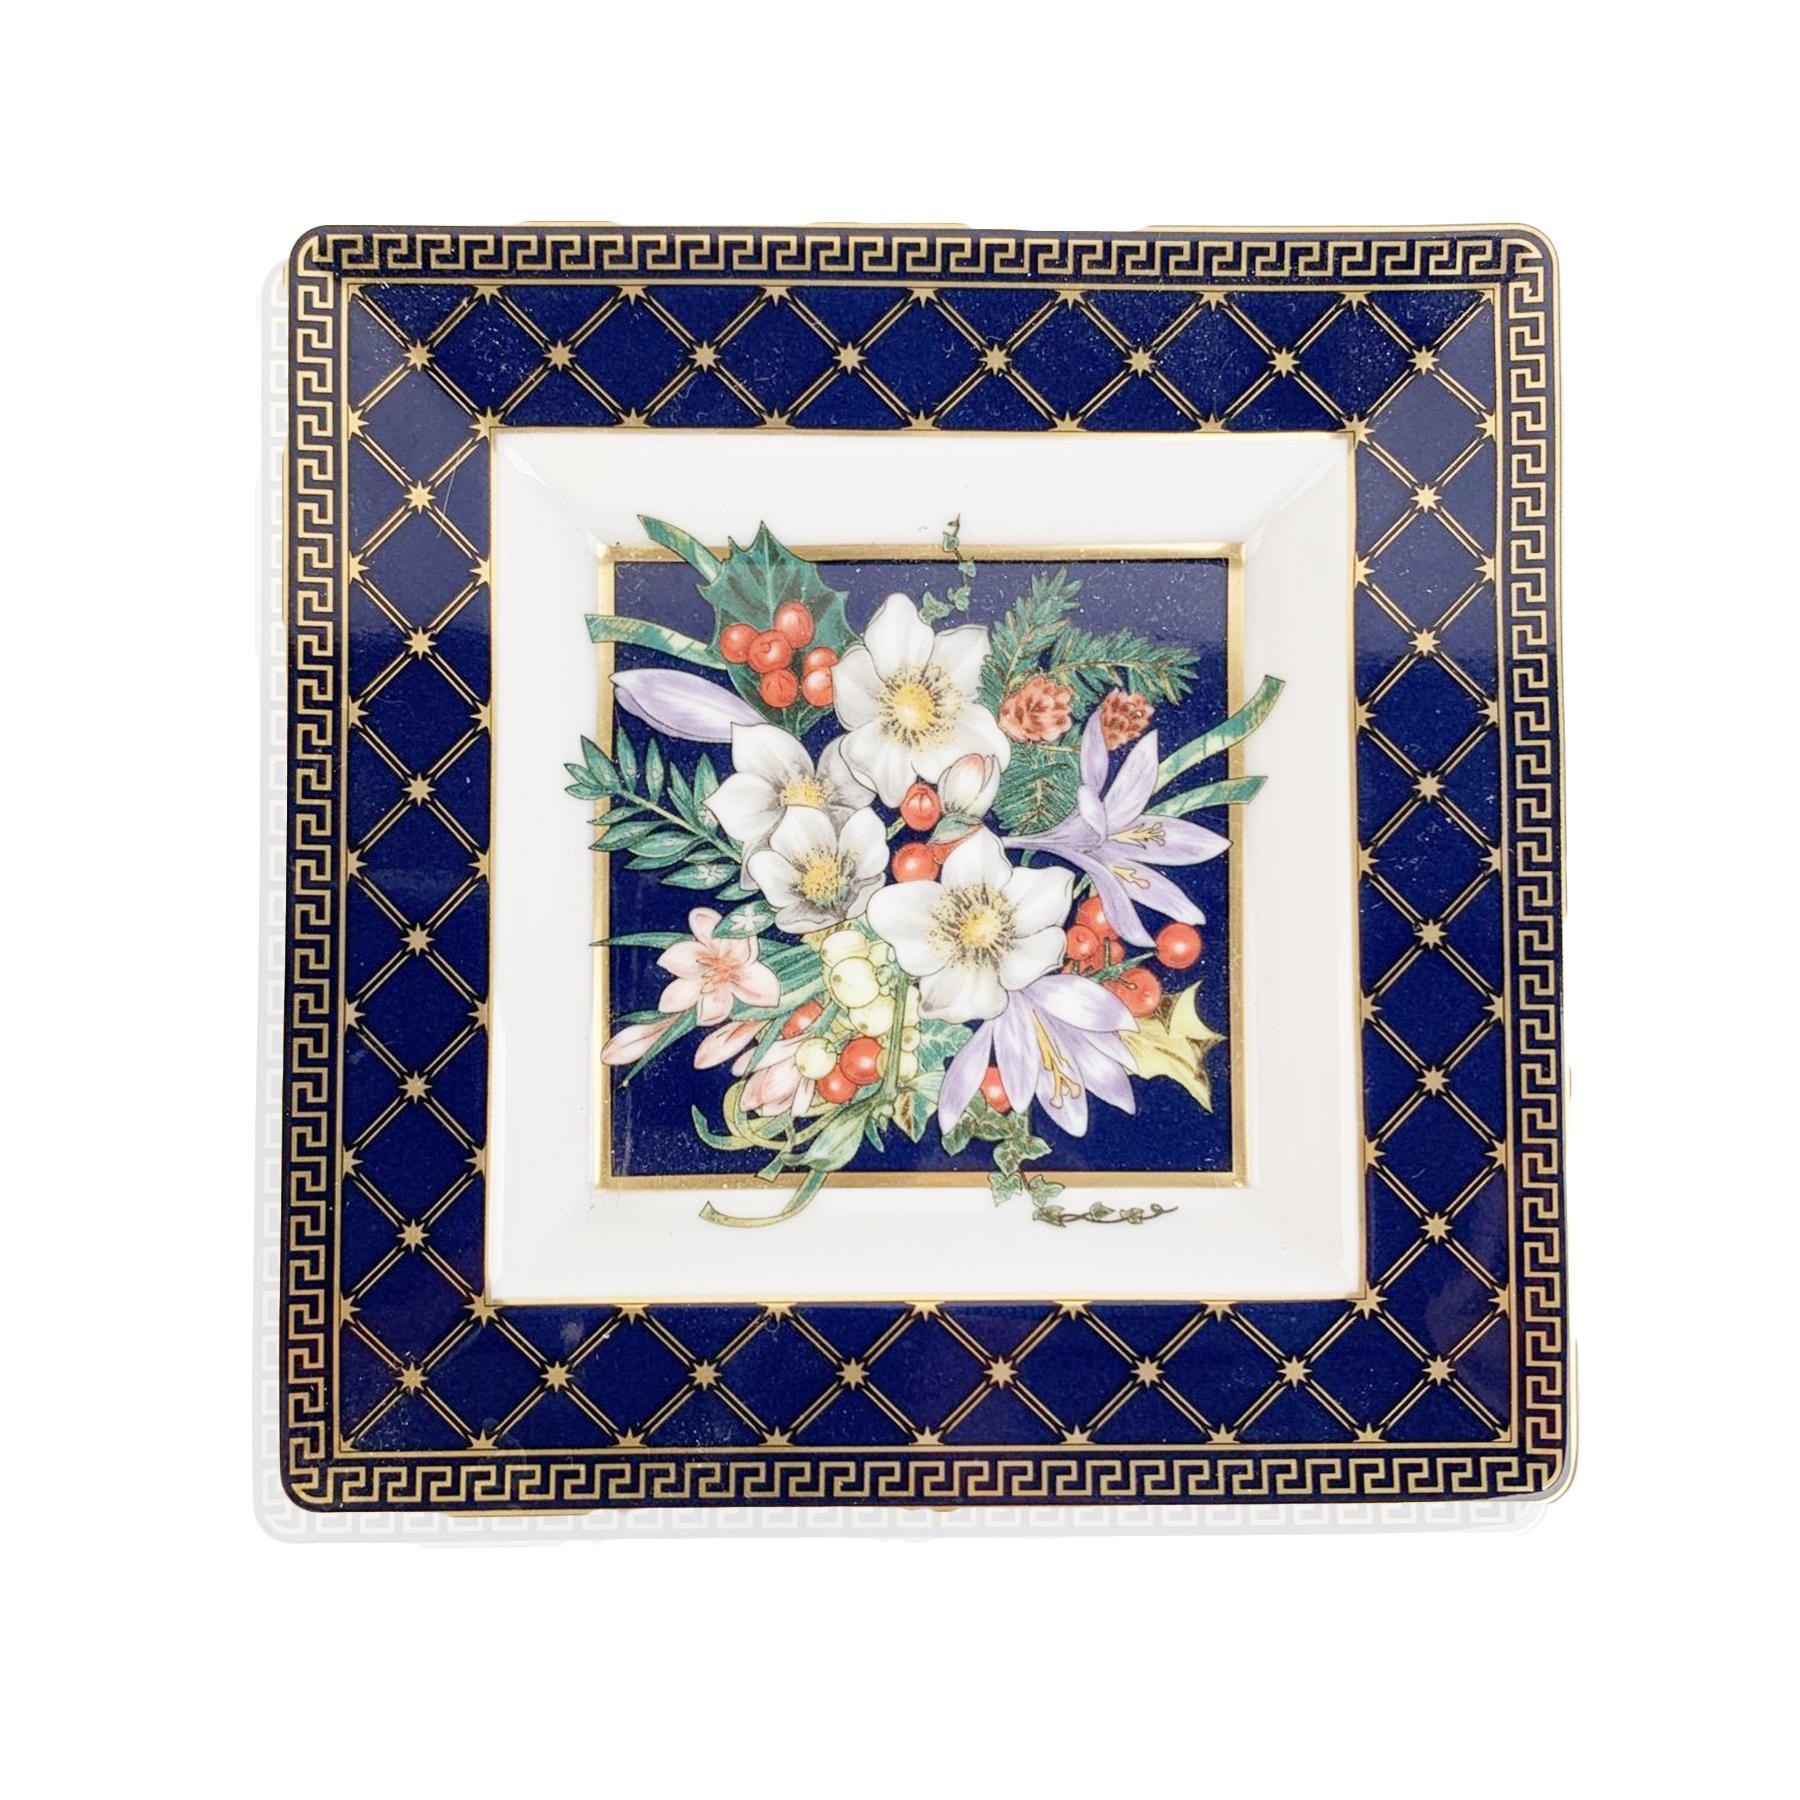 Versace square-shaped ashtray. White Rosenthal Porcelain with blue accents and with floral themed. ''Rosenthall - Versace - Let there be loved 2002